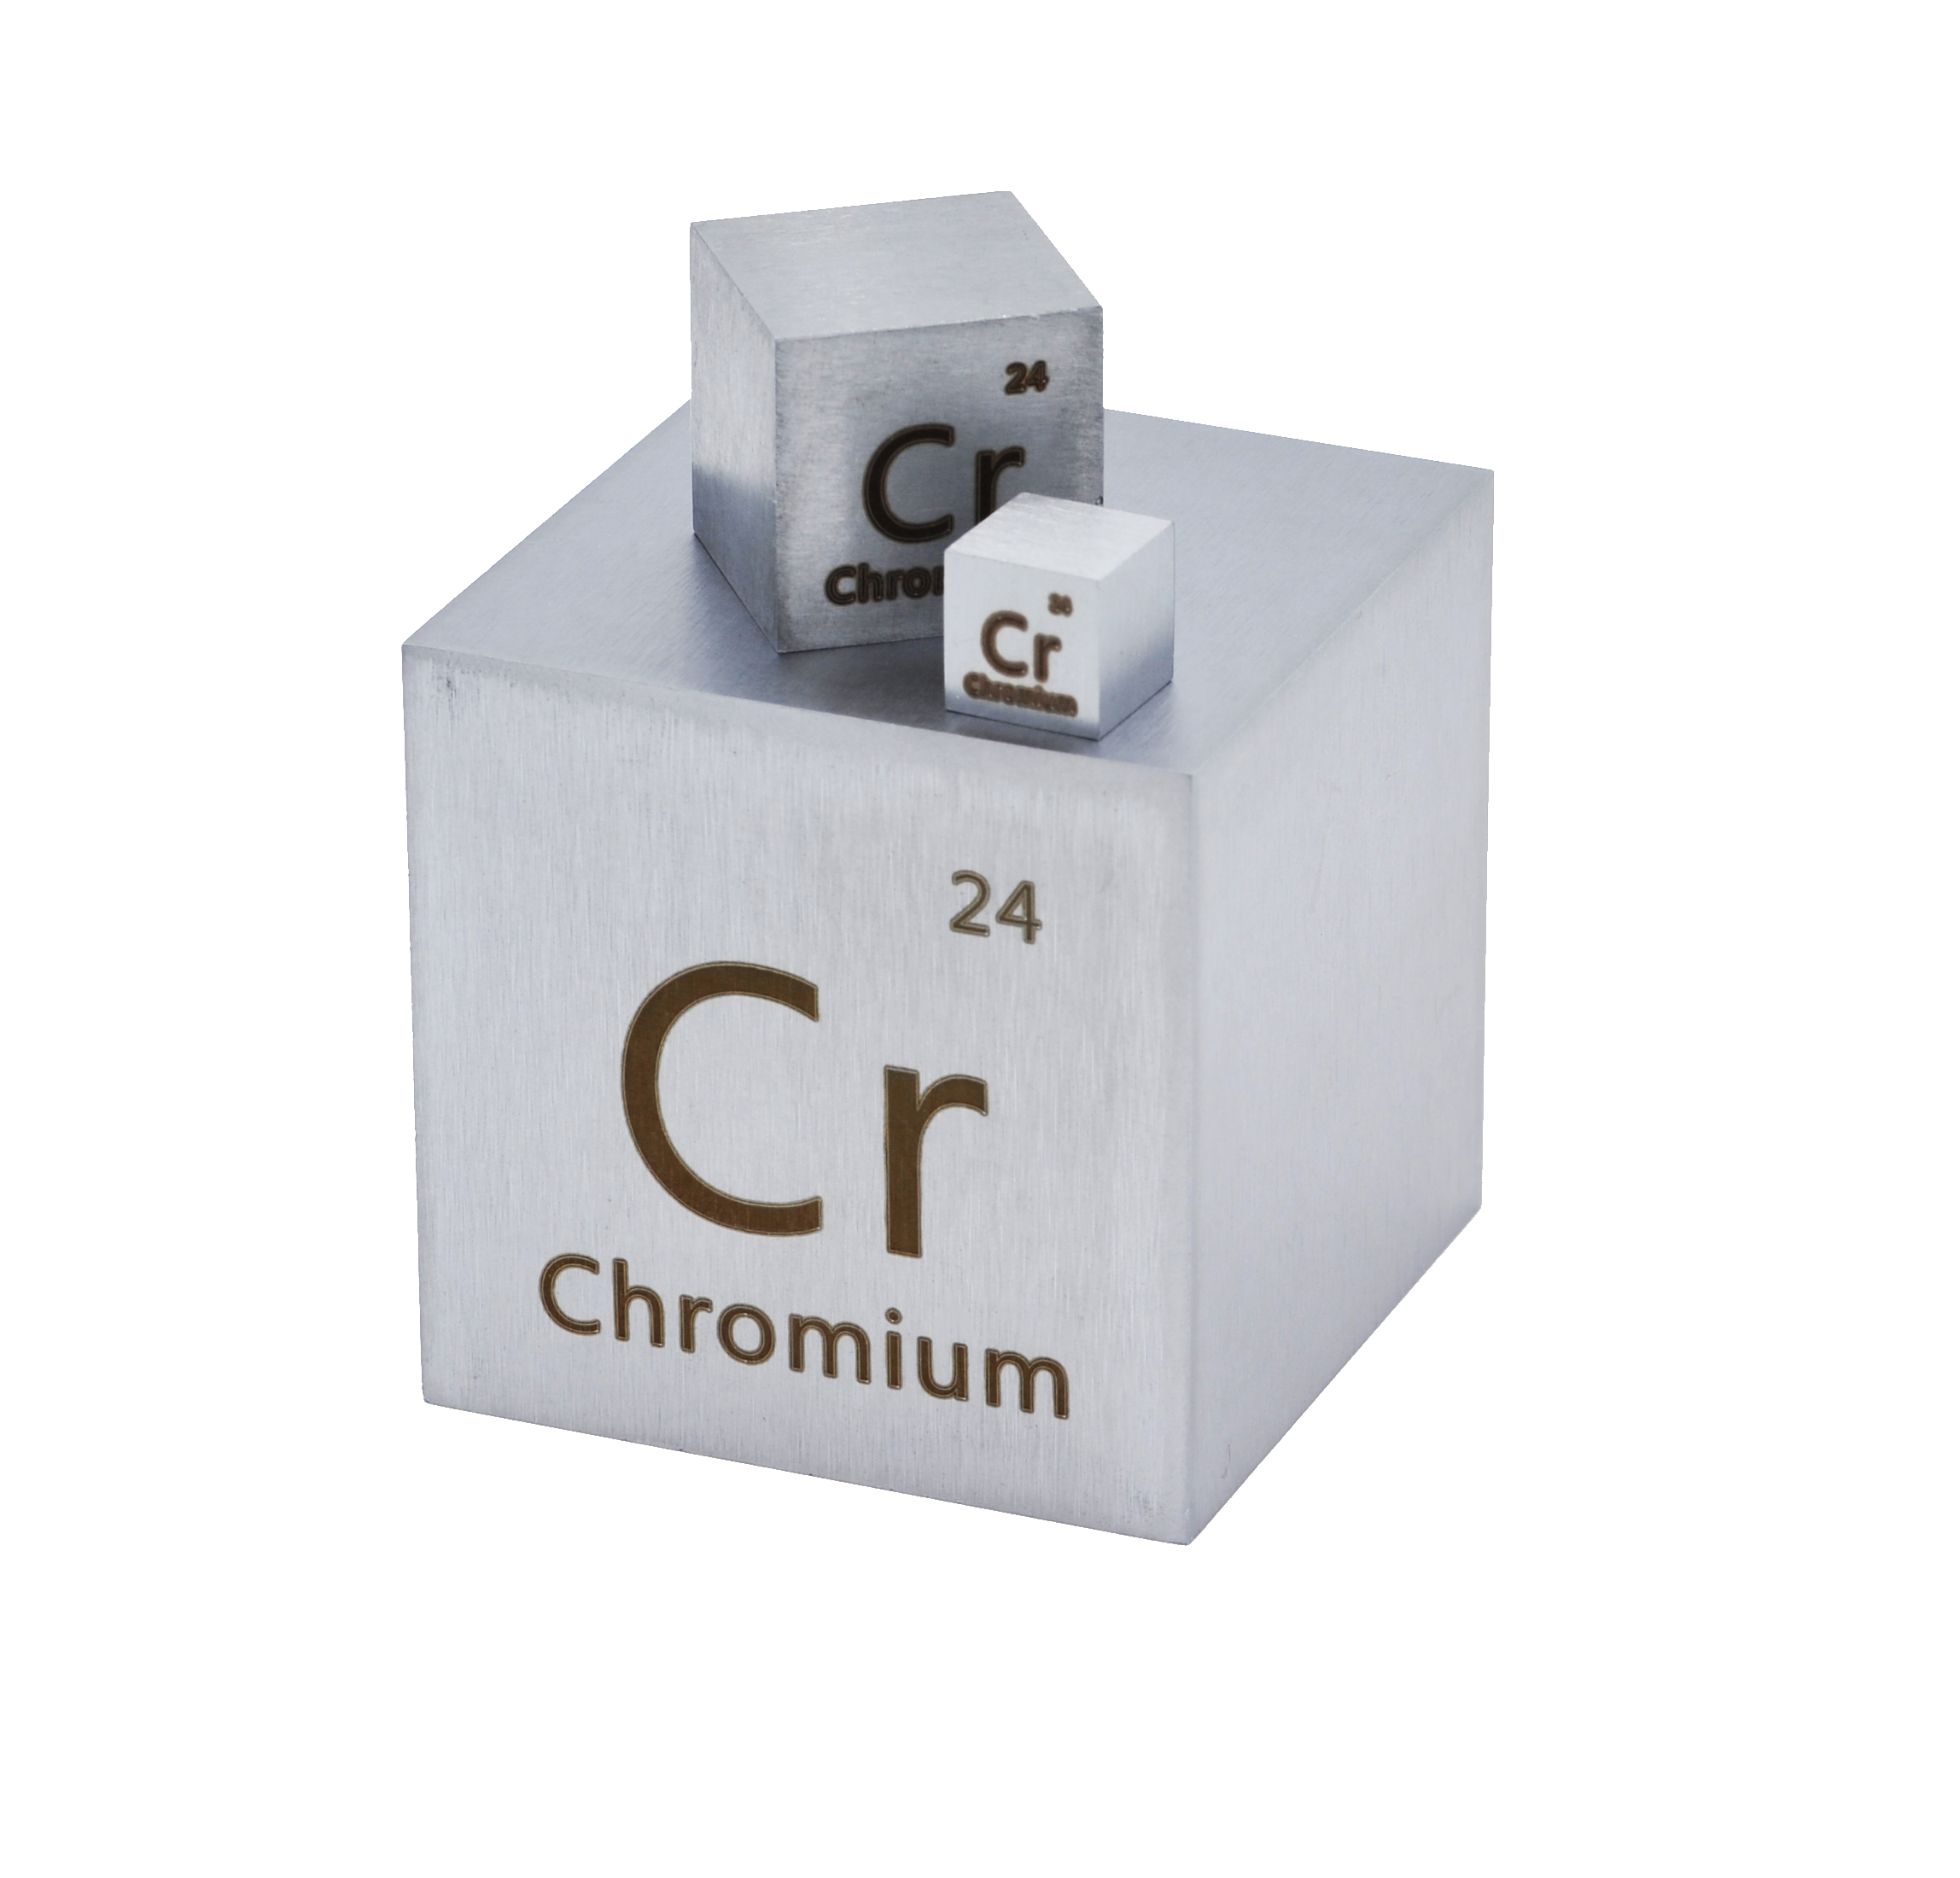 Chromium Metal 10mm Density Cube 99.95% Pure for Element Collection USA SHIP 